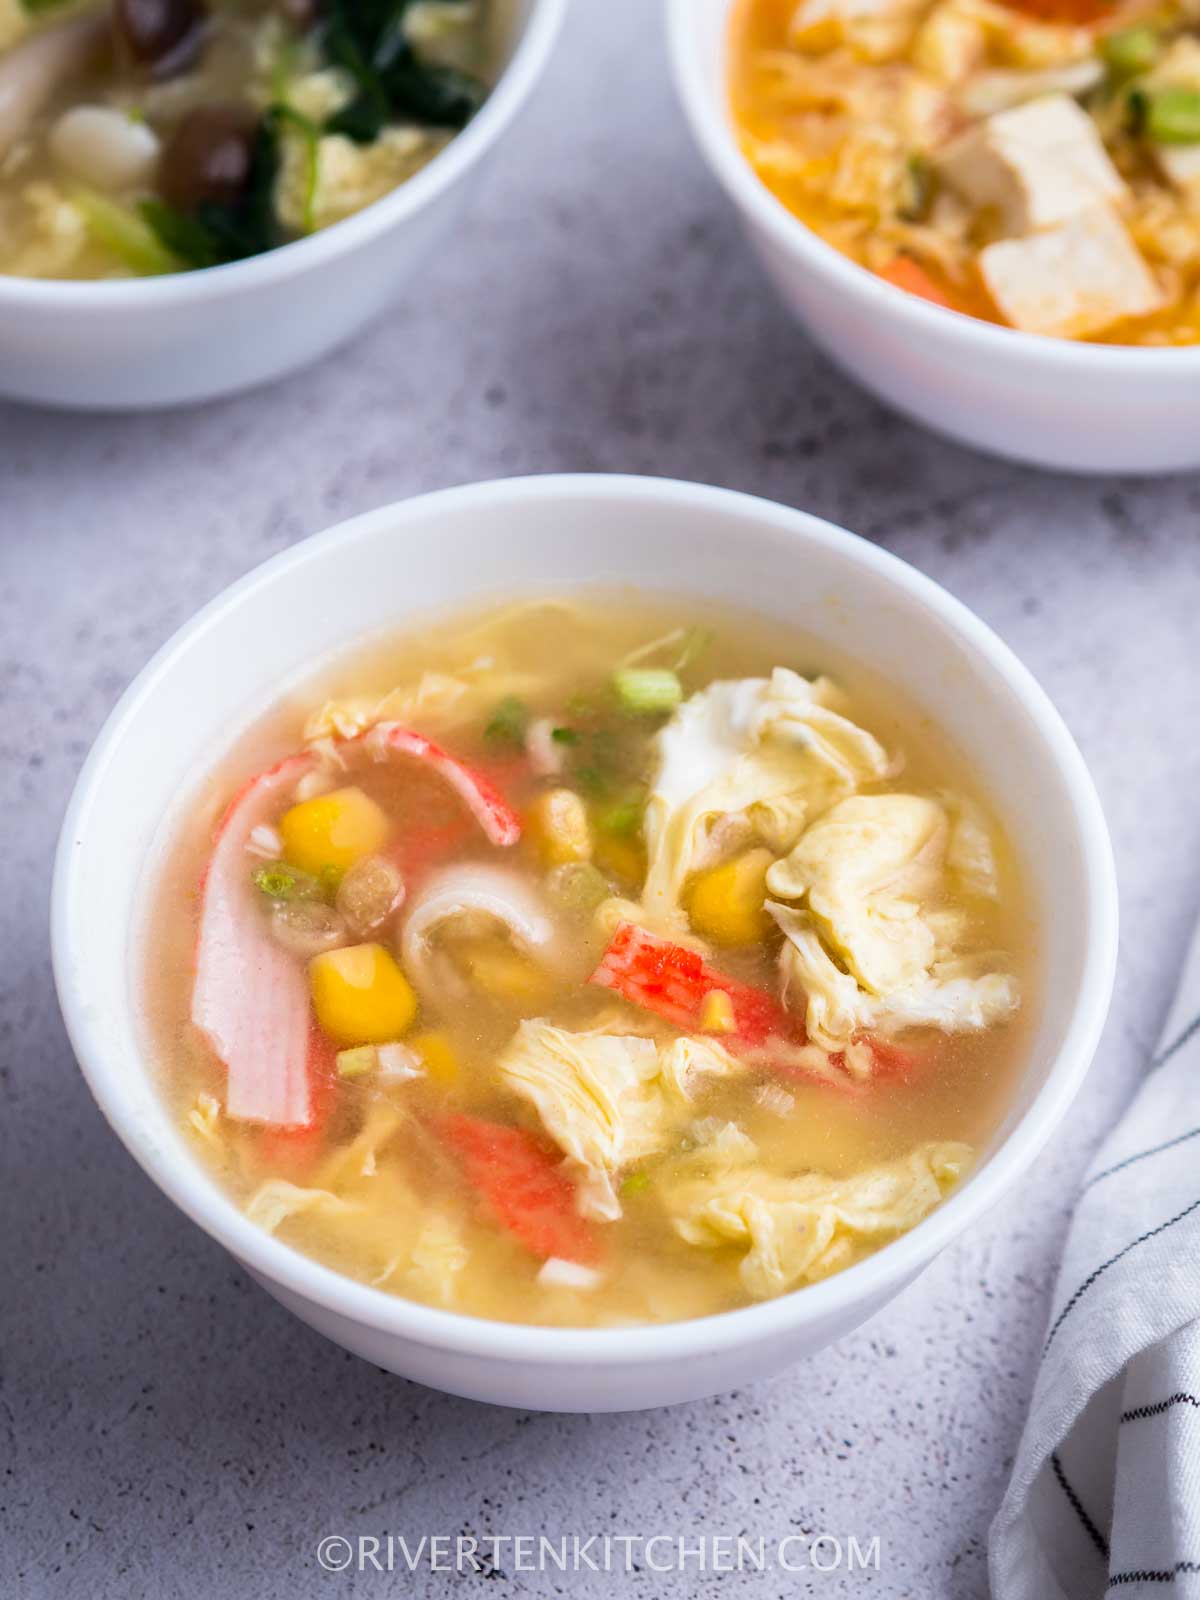 egg soup with crab sticks and corn kernels